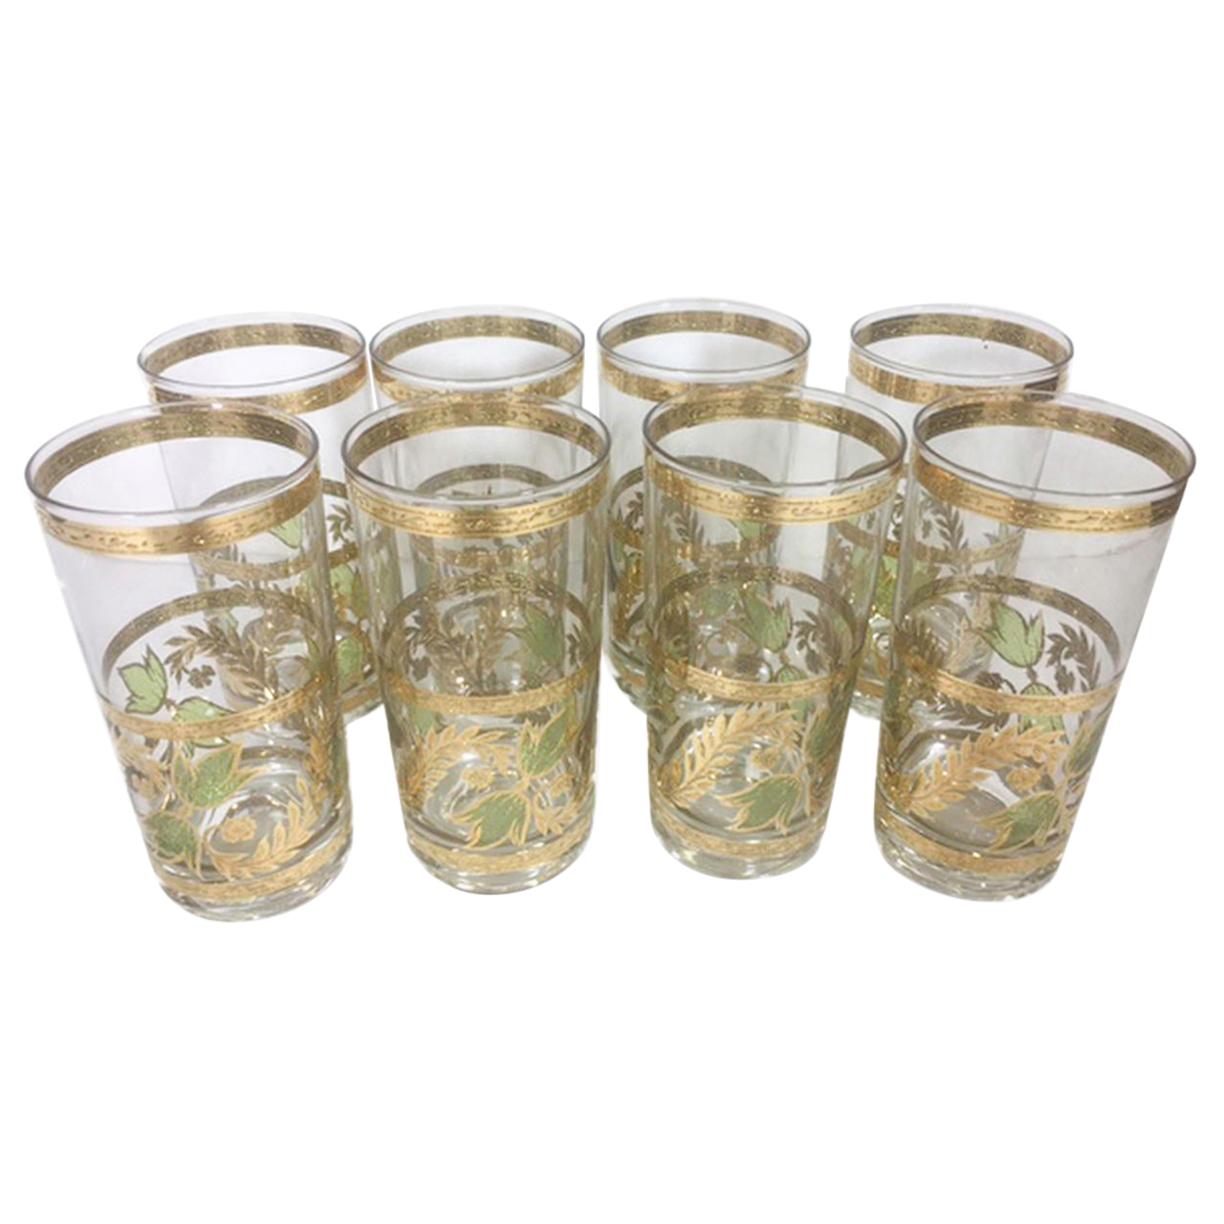 Eight Vintage Highball Glasses by Culver with Green Leaves and 22k Gold Vines